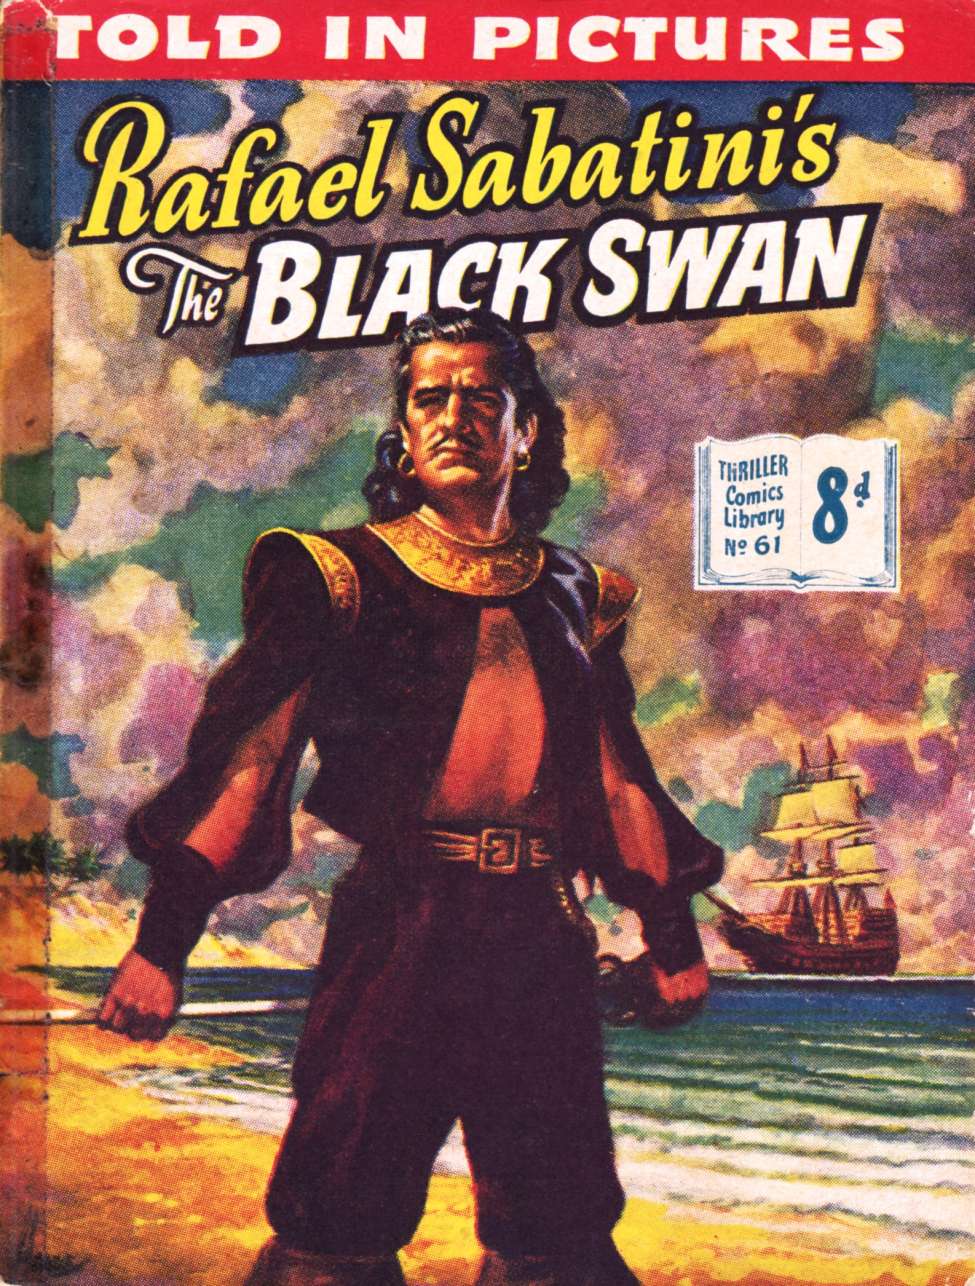 Book Cover For Thriller Comics Library 61 - The Black Swan